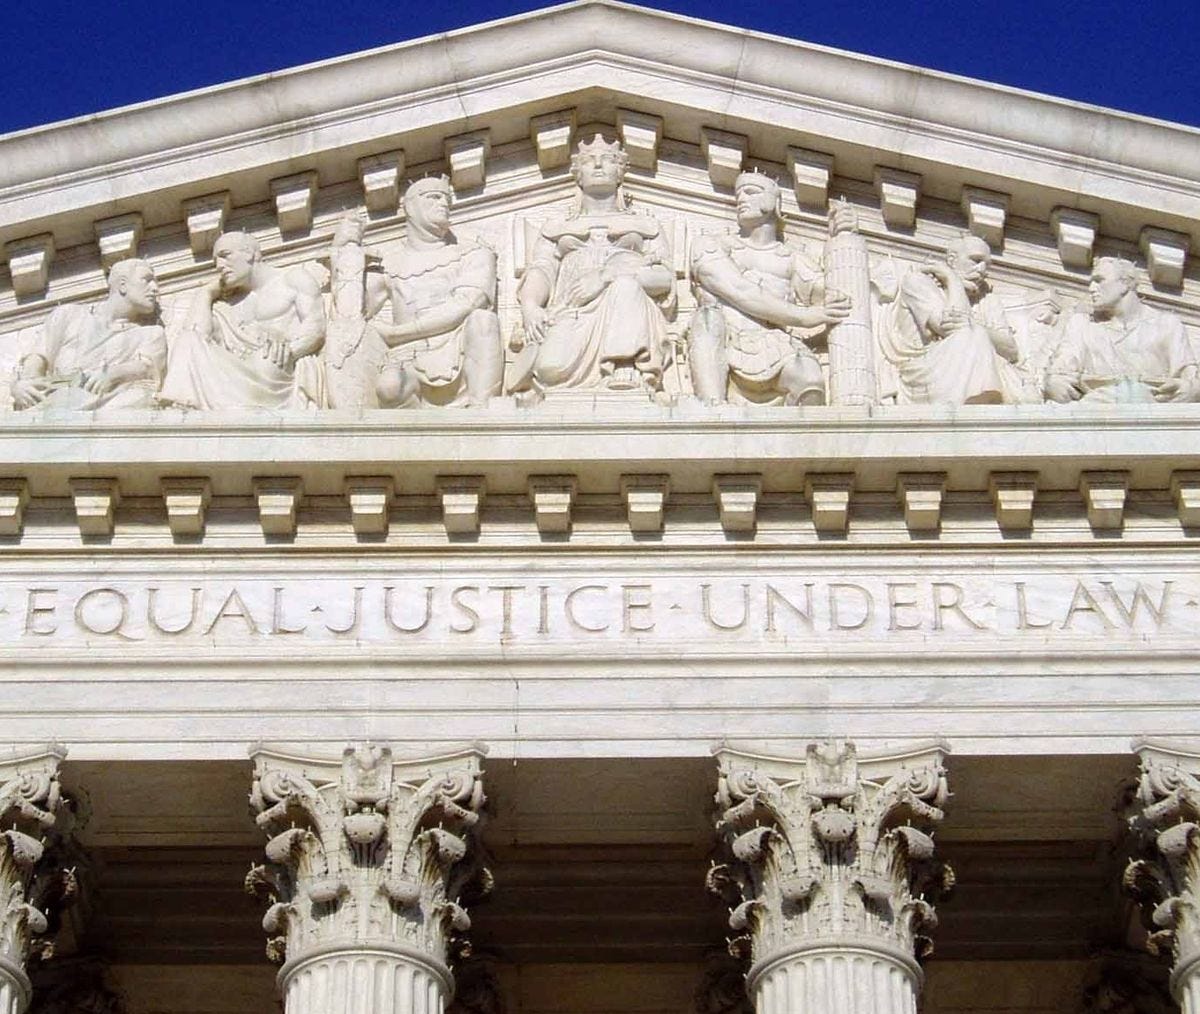 Equal justice under law - Wikipedia